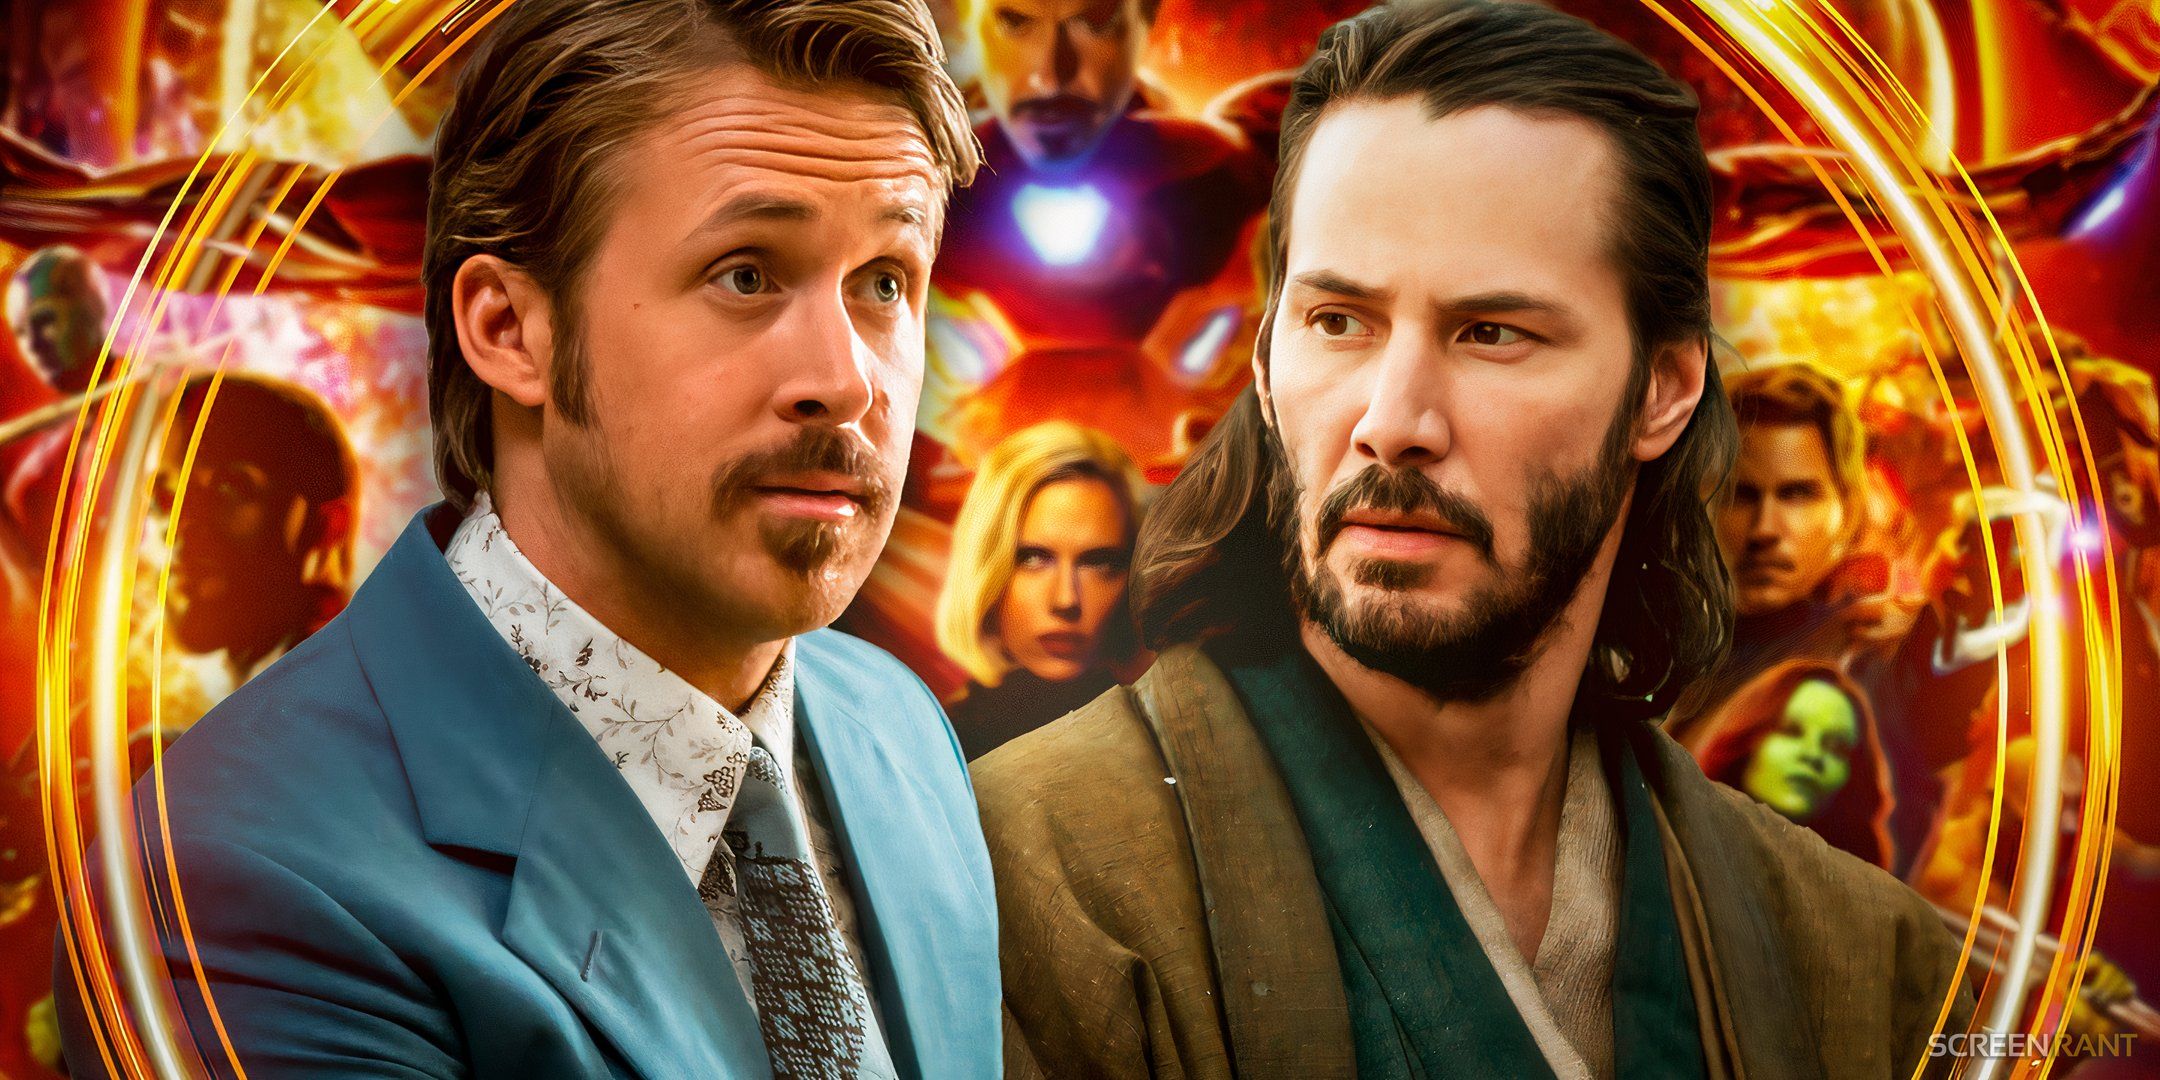 (Ryan Gosling as Holland March) from The Nice Guys and (Keanu Reeves as Kai) from 47 Ronin in front of an Avengers: Infinity War poster